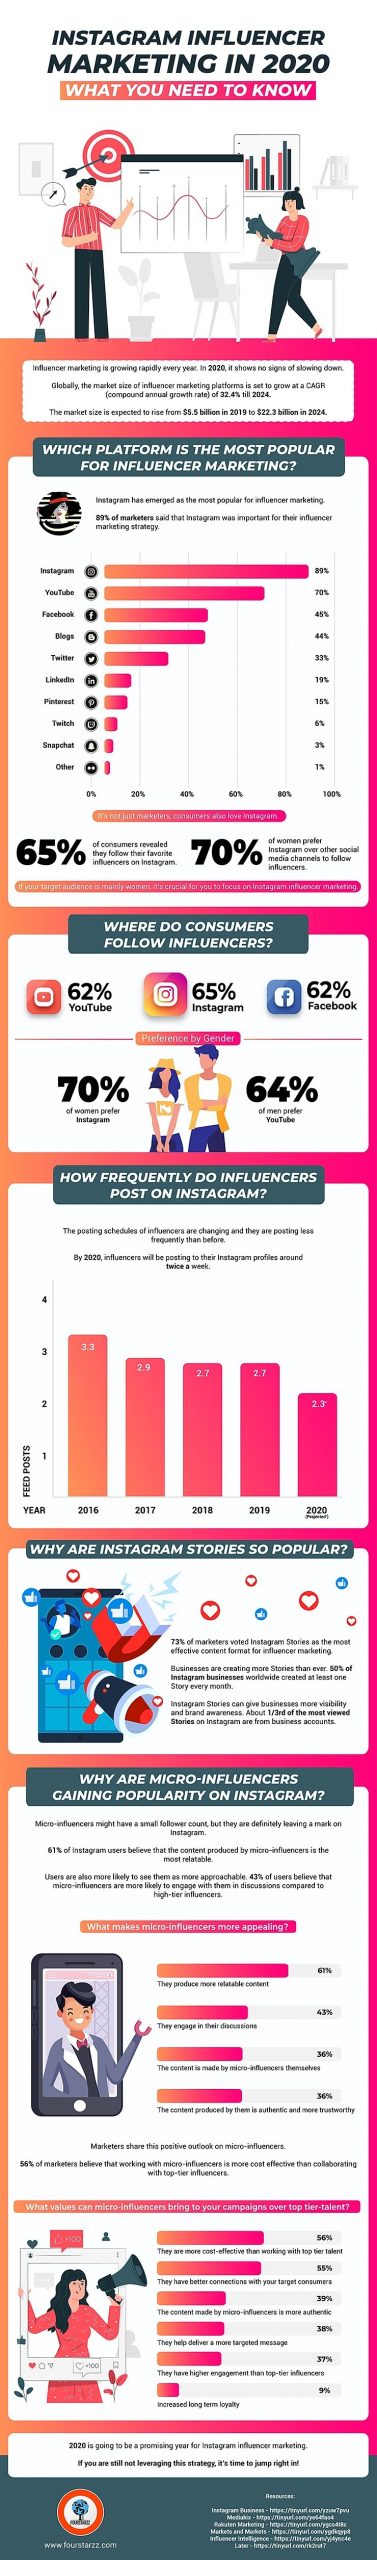 Why is Instagram Influencer Marketing So Effective in 2020? [Infographic]